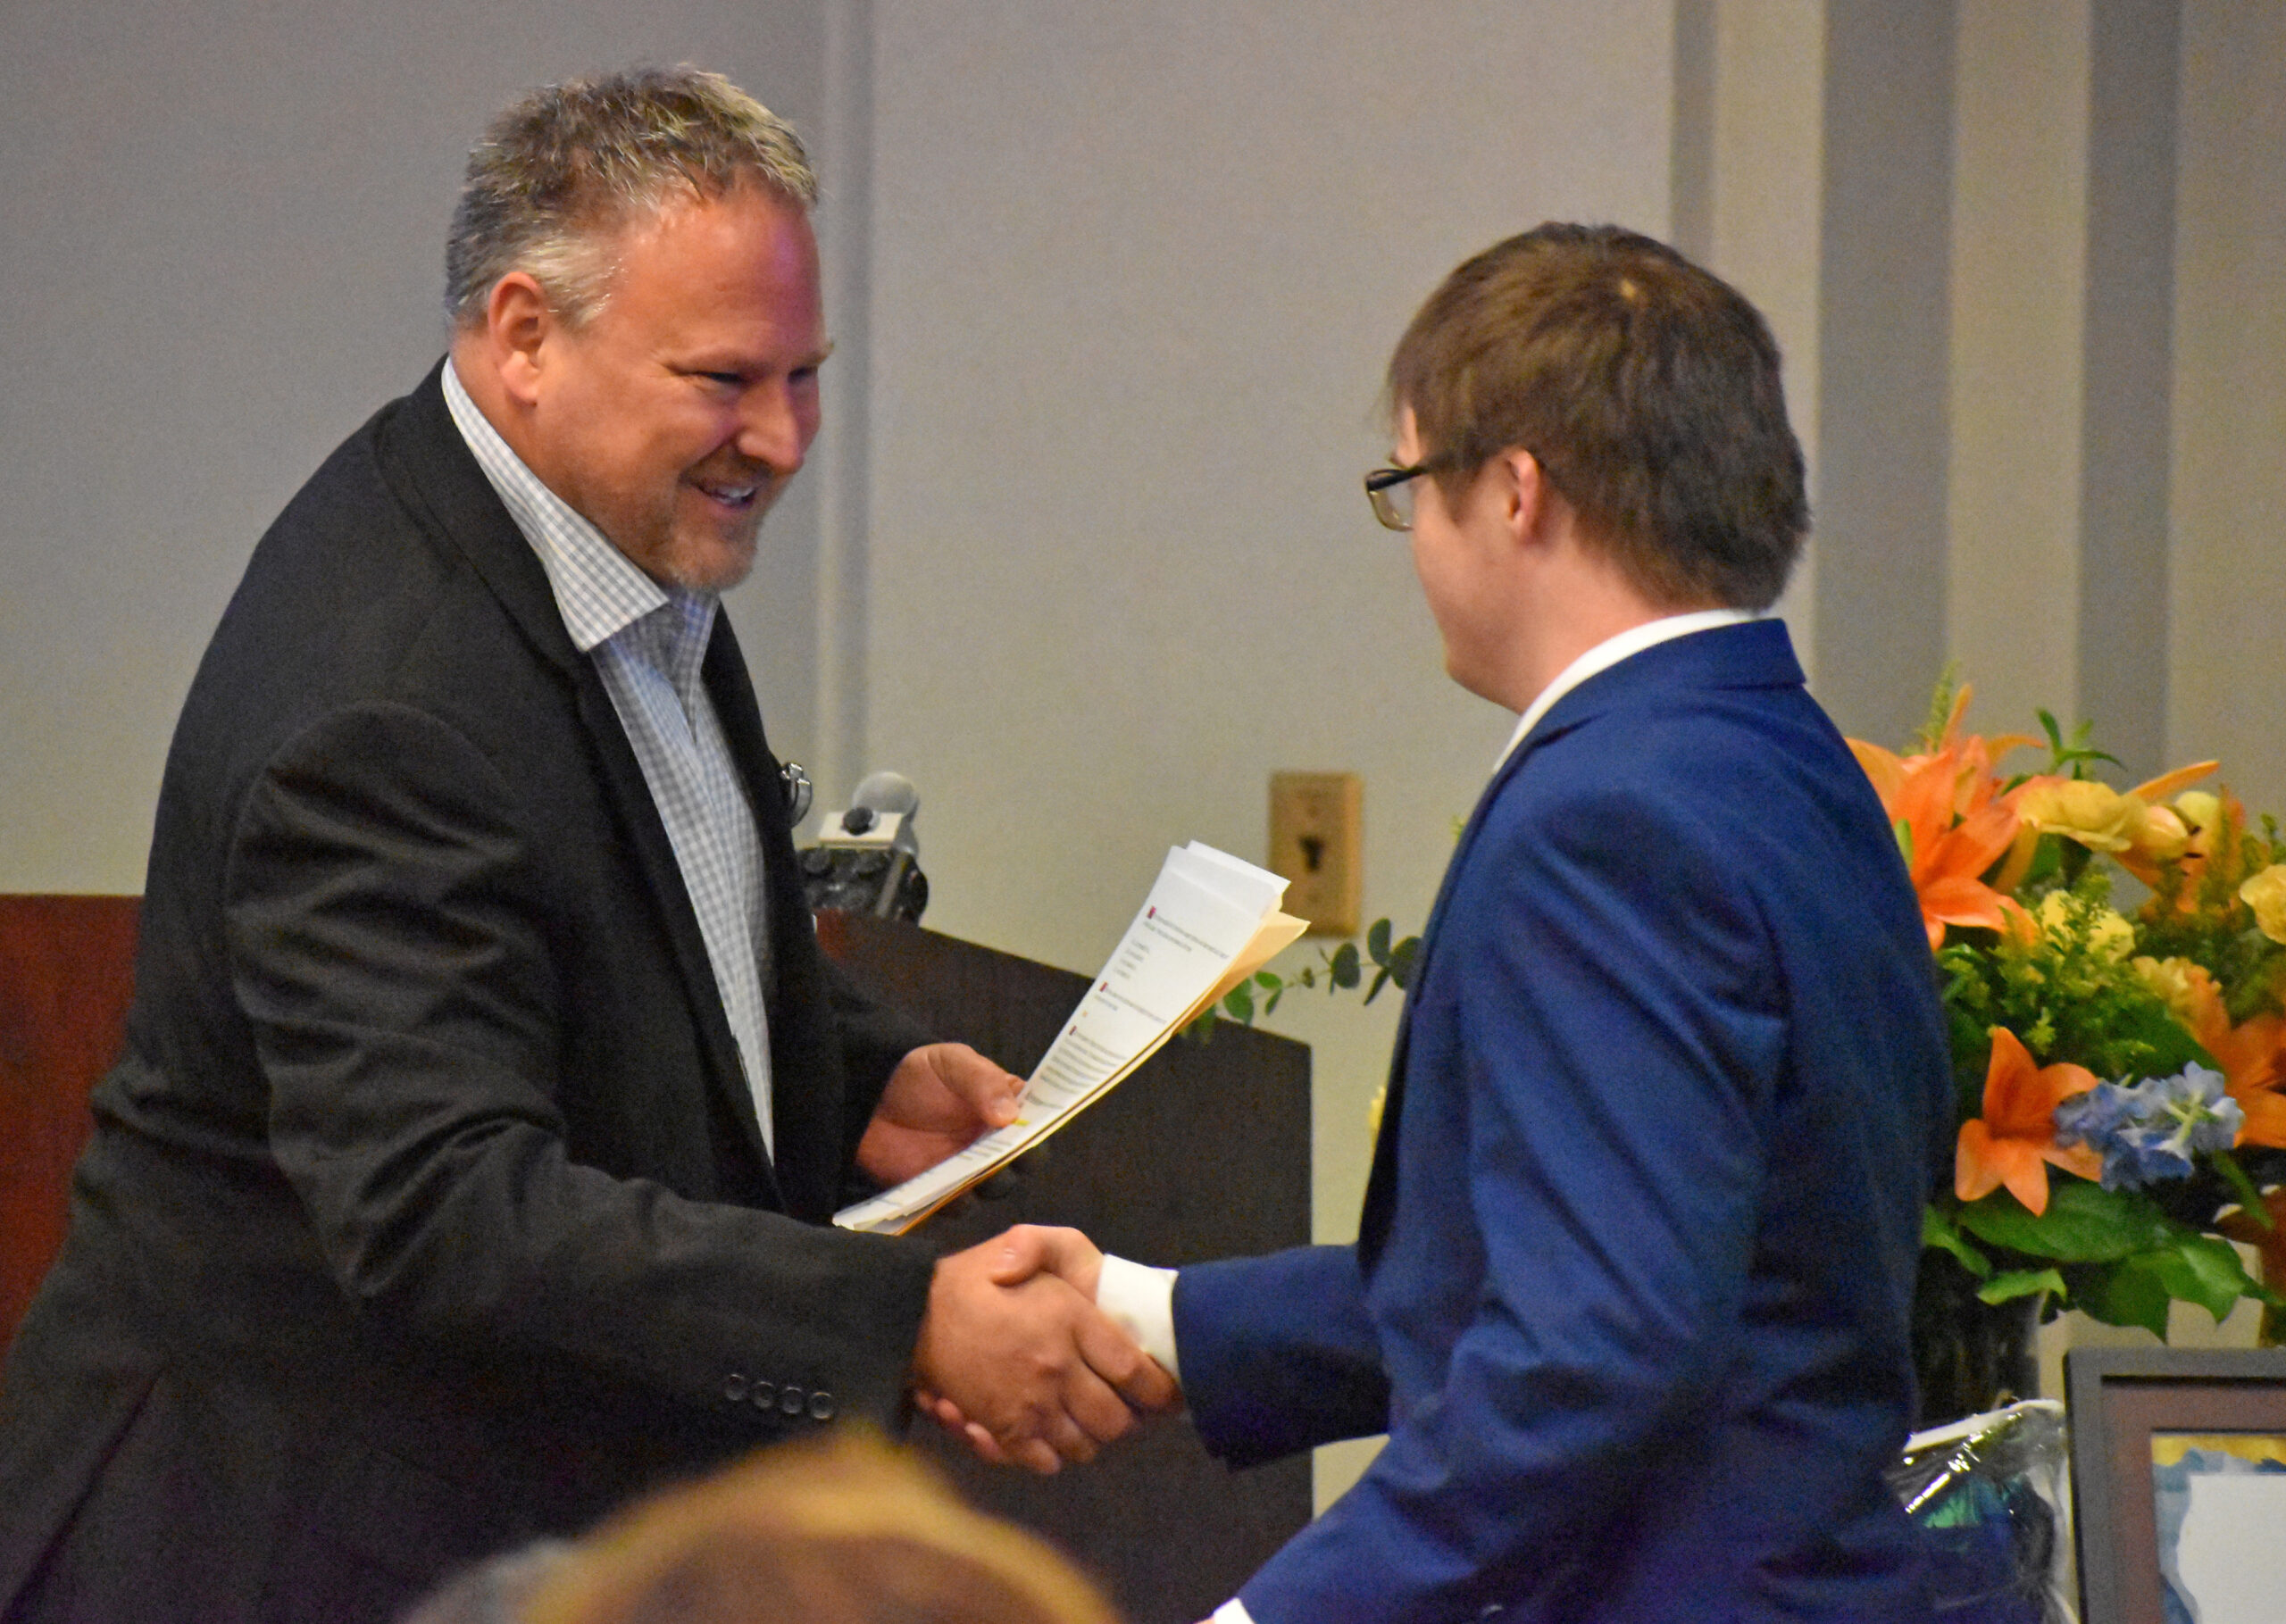 Intern Drew Gustin, right, shakes hands with Jeffrey Waise during the Project SEARCH graduation ceremony